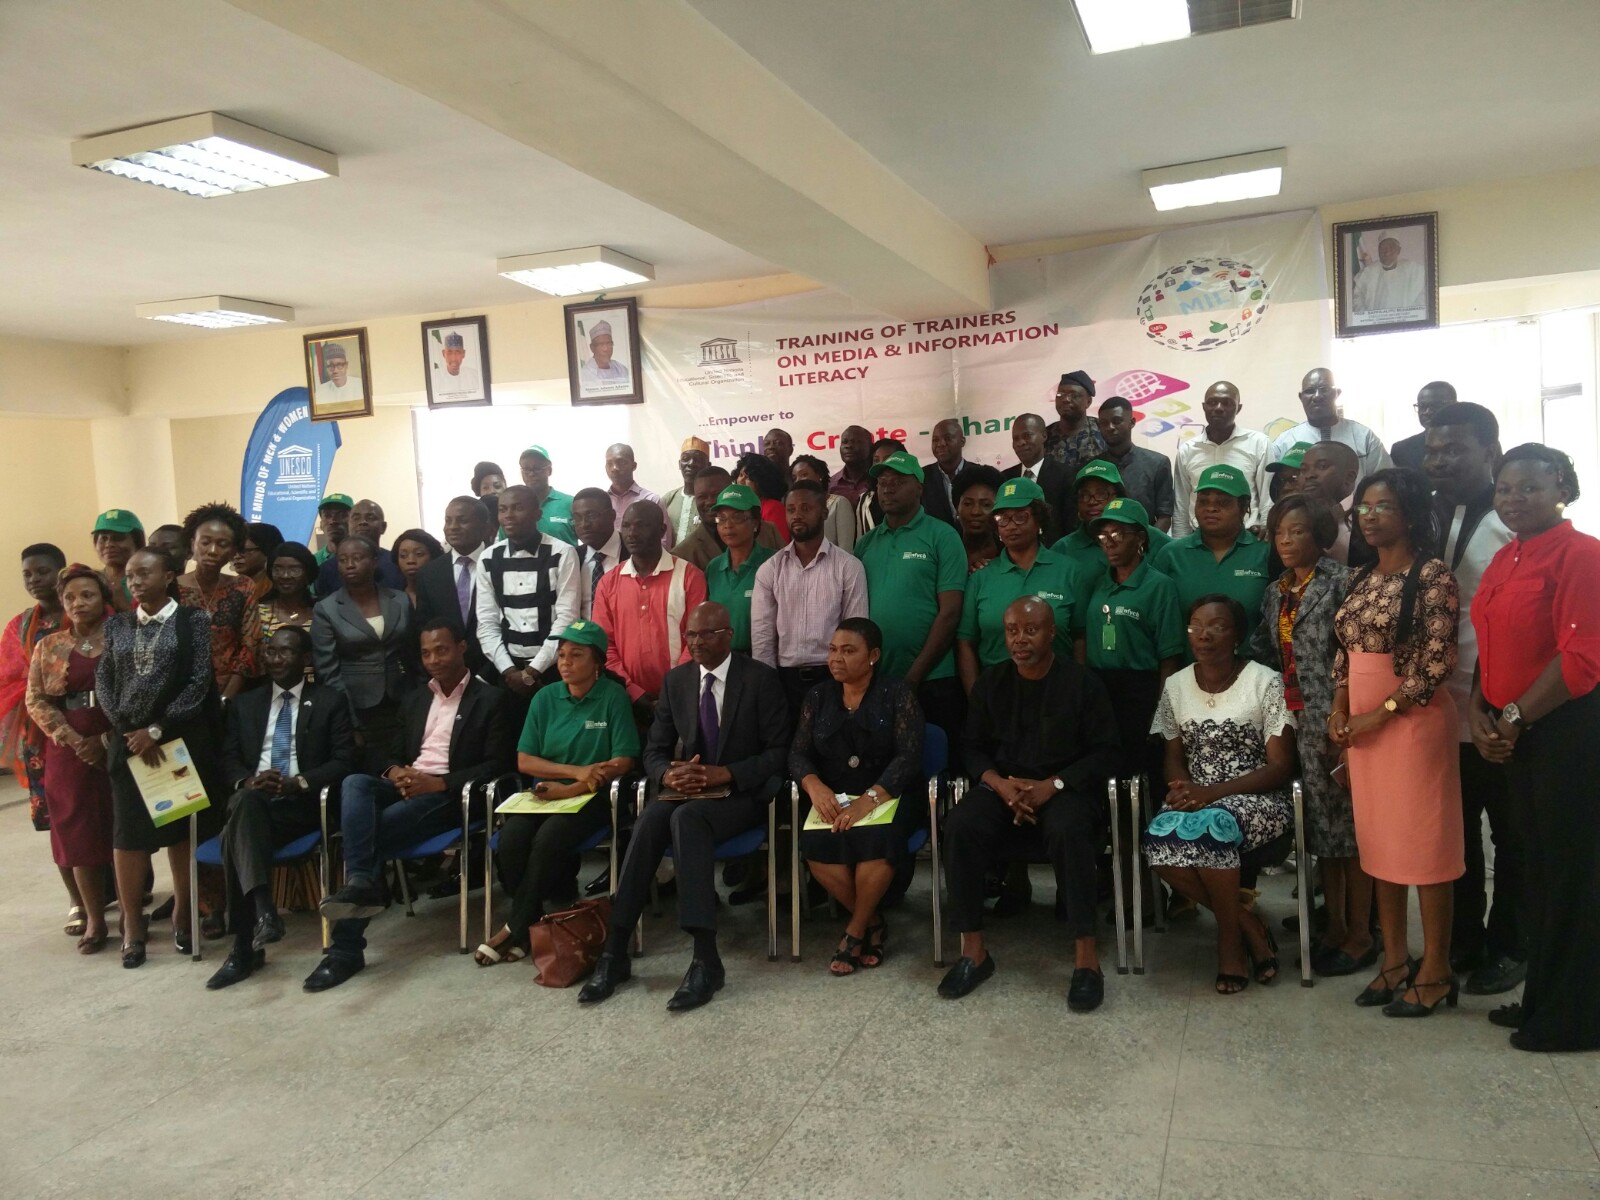 UNESCO inaugurates coalition for media and information literacy in Nigeria